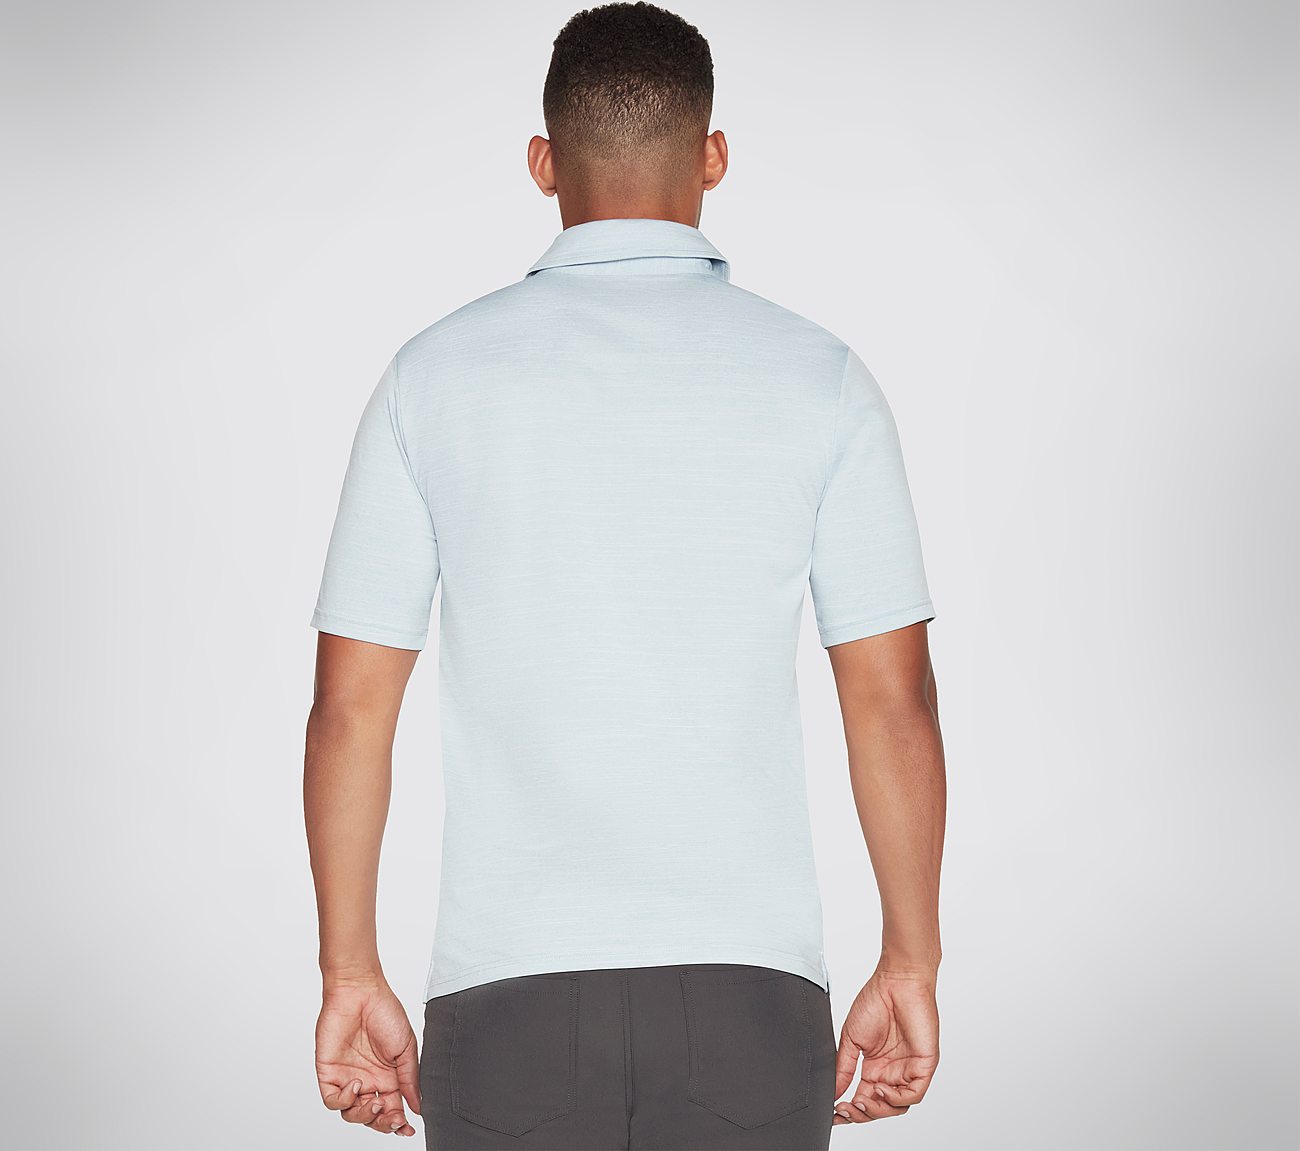 ON THE ROAD POLO, LLIGHT BLUE Apparel Top View